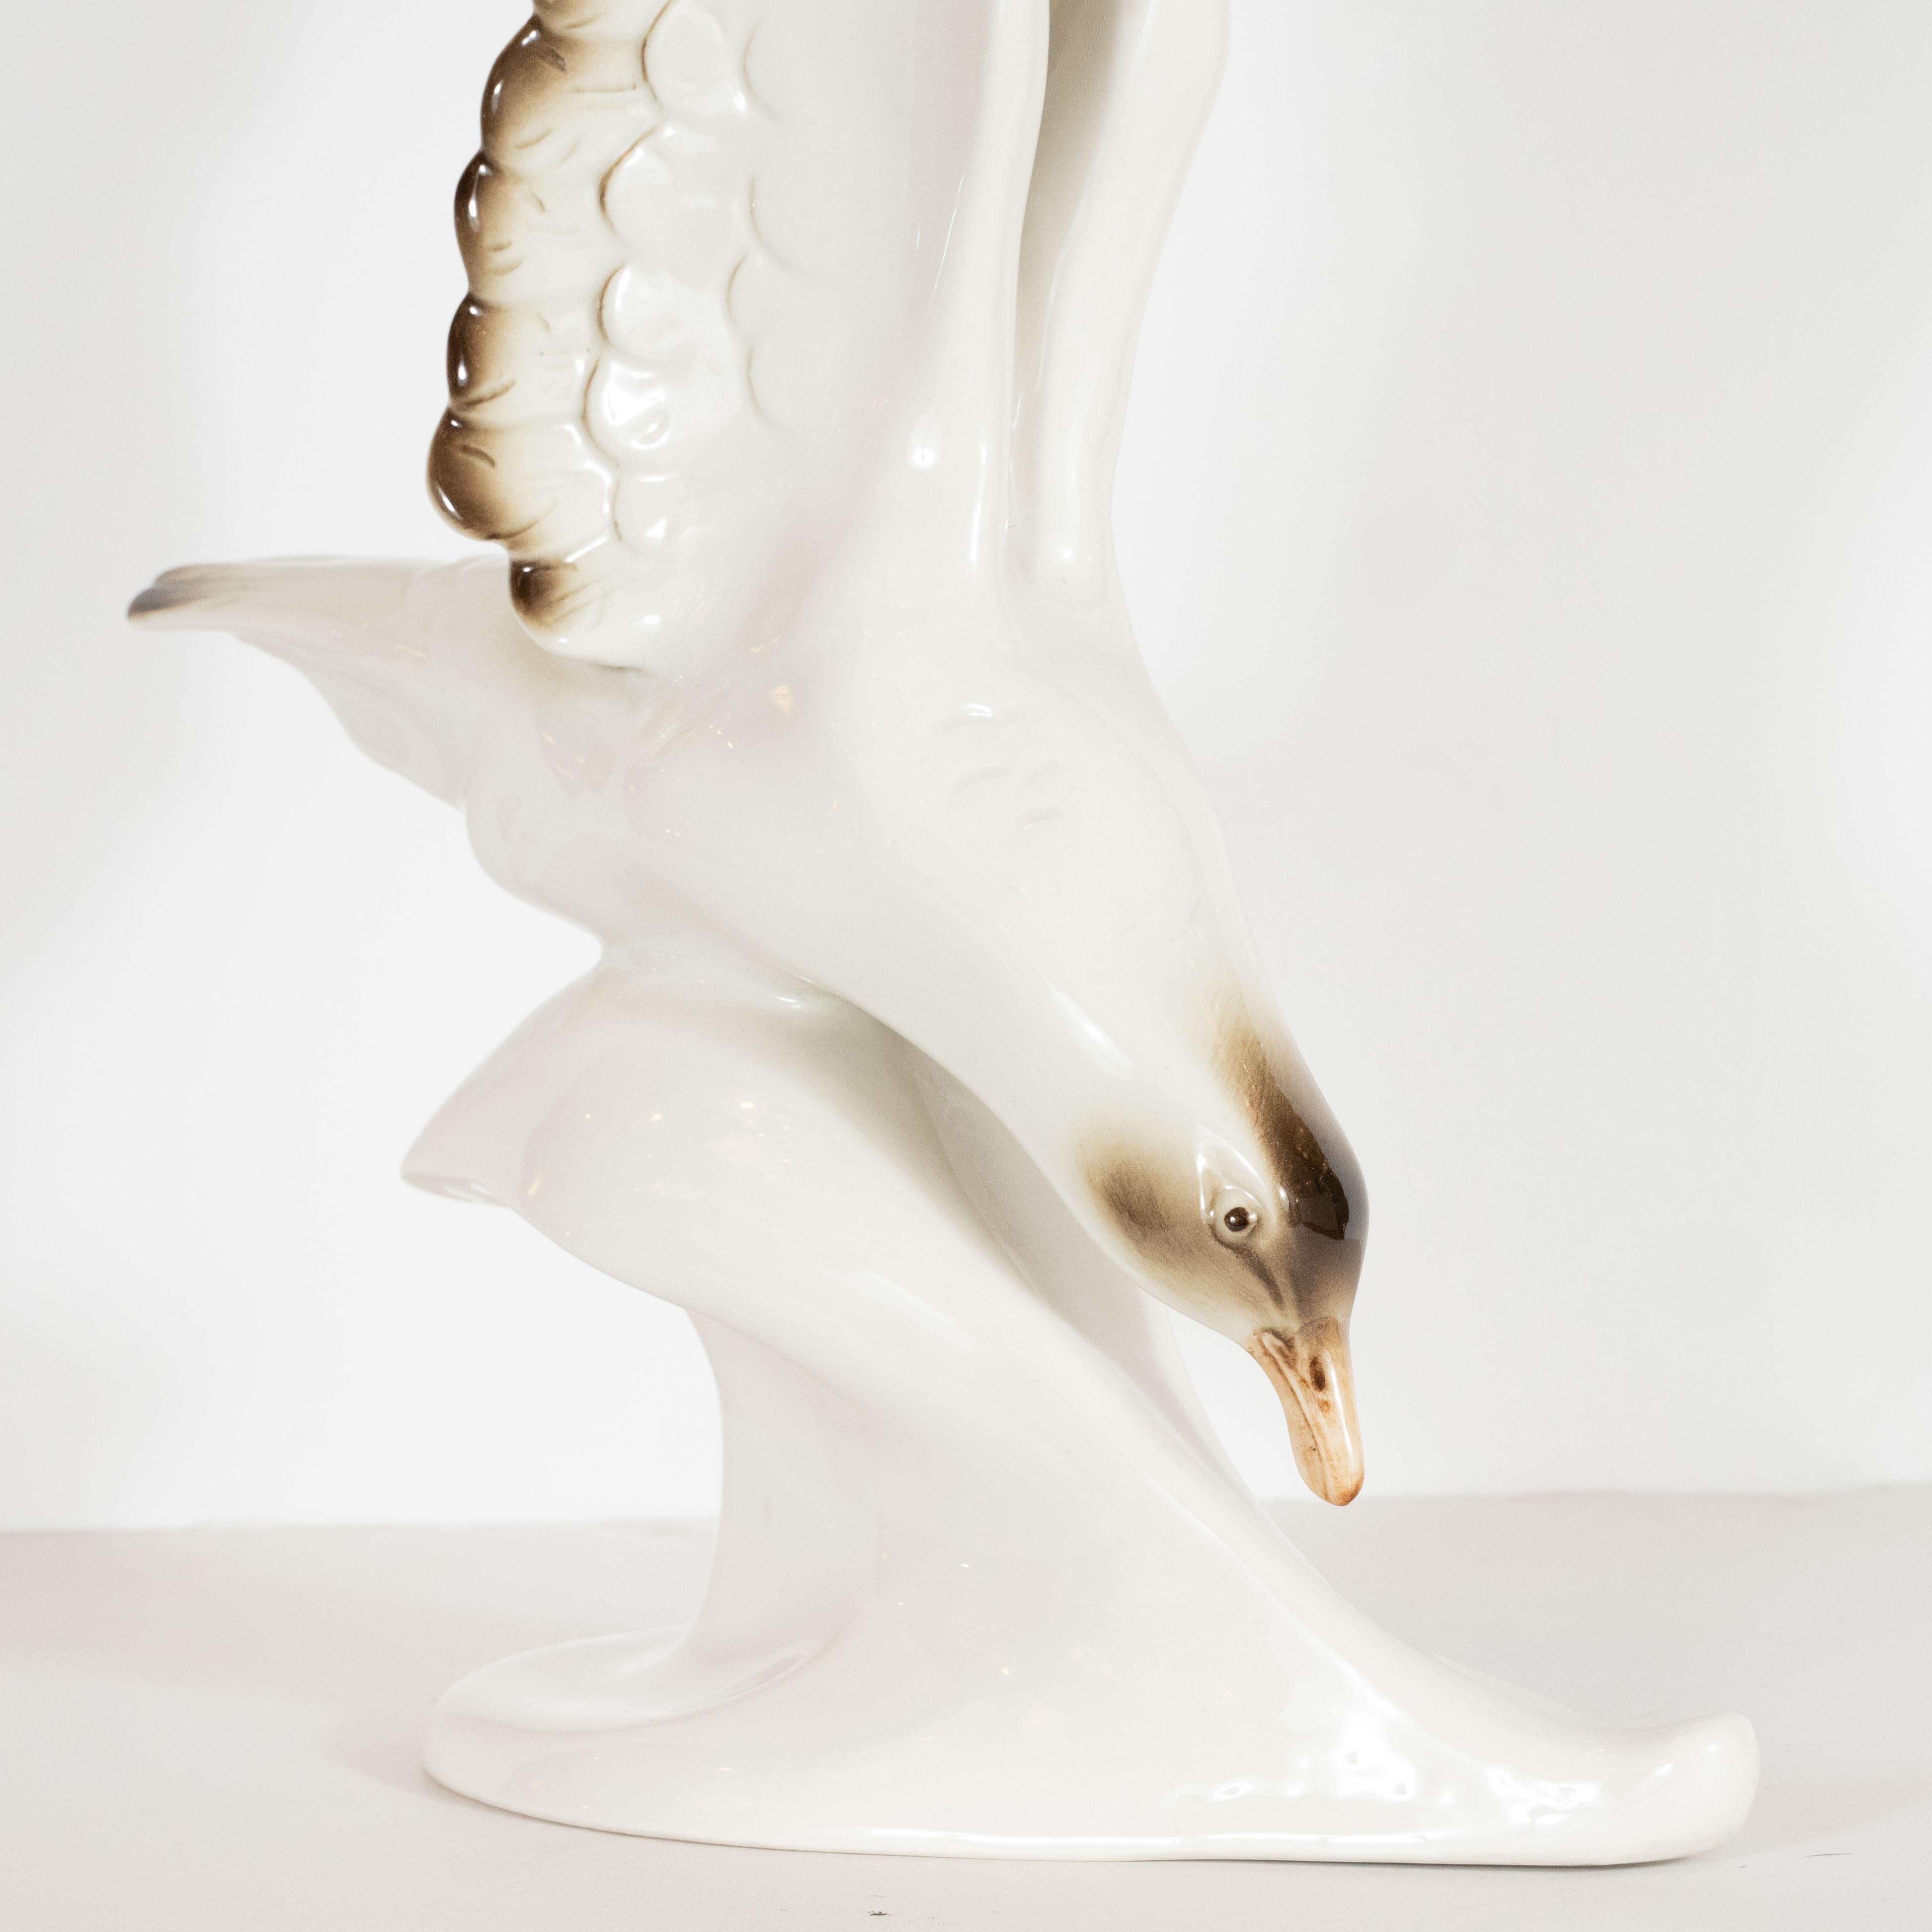 This elegant sculpture was realized by the esteemed porcelain company, Royal Dux, and hand fabricated in Czechoslovakia, circa 1950. It features a cream colored seagull with touches of sable brown on its finely articulated wings and a mocha hued